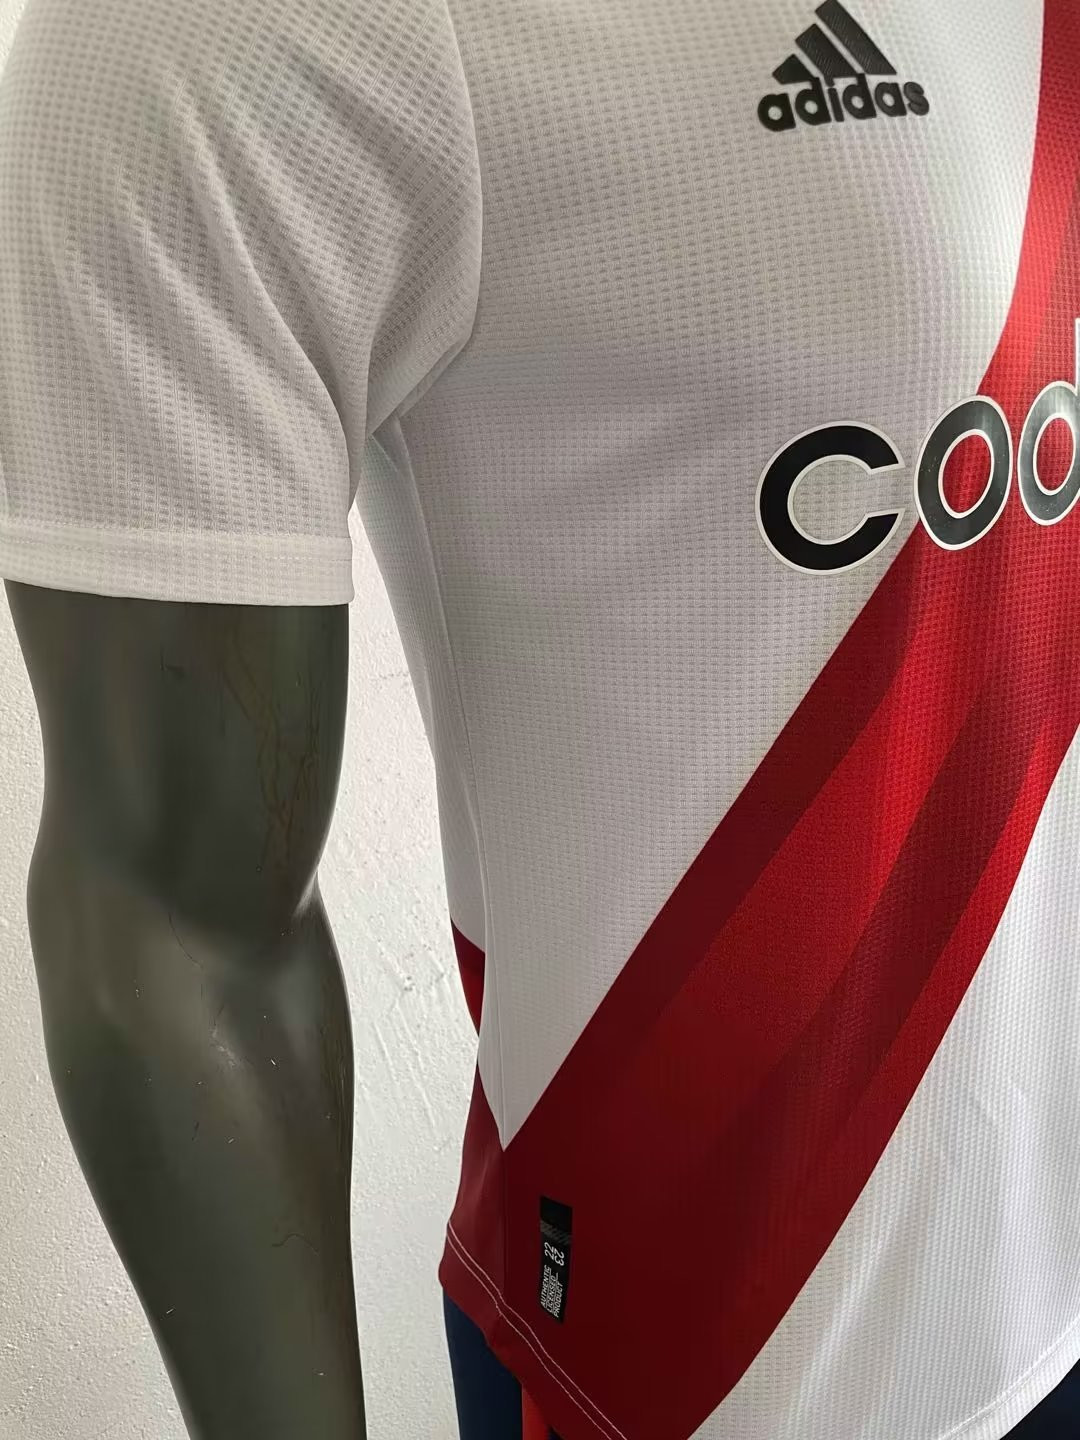 River Plate Soccer Jersey Replica Home 2023/24 Mens (Player Version)